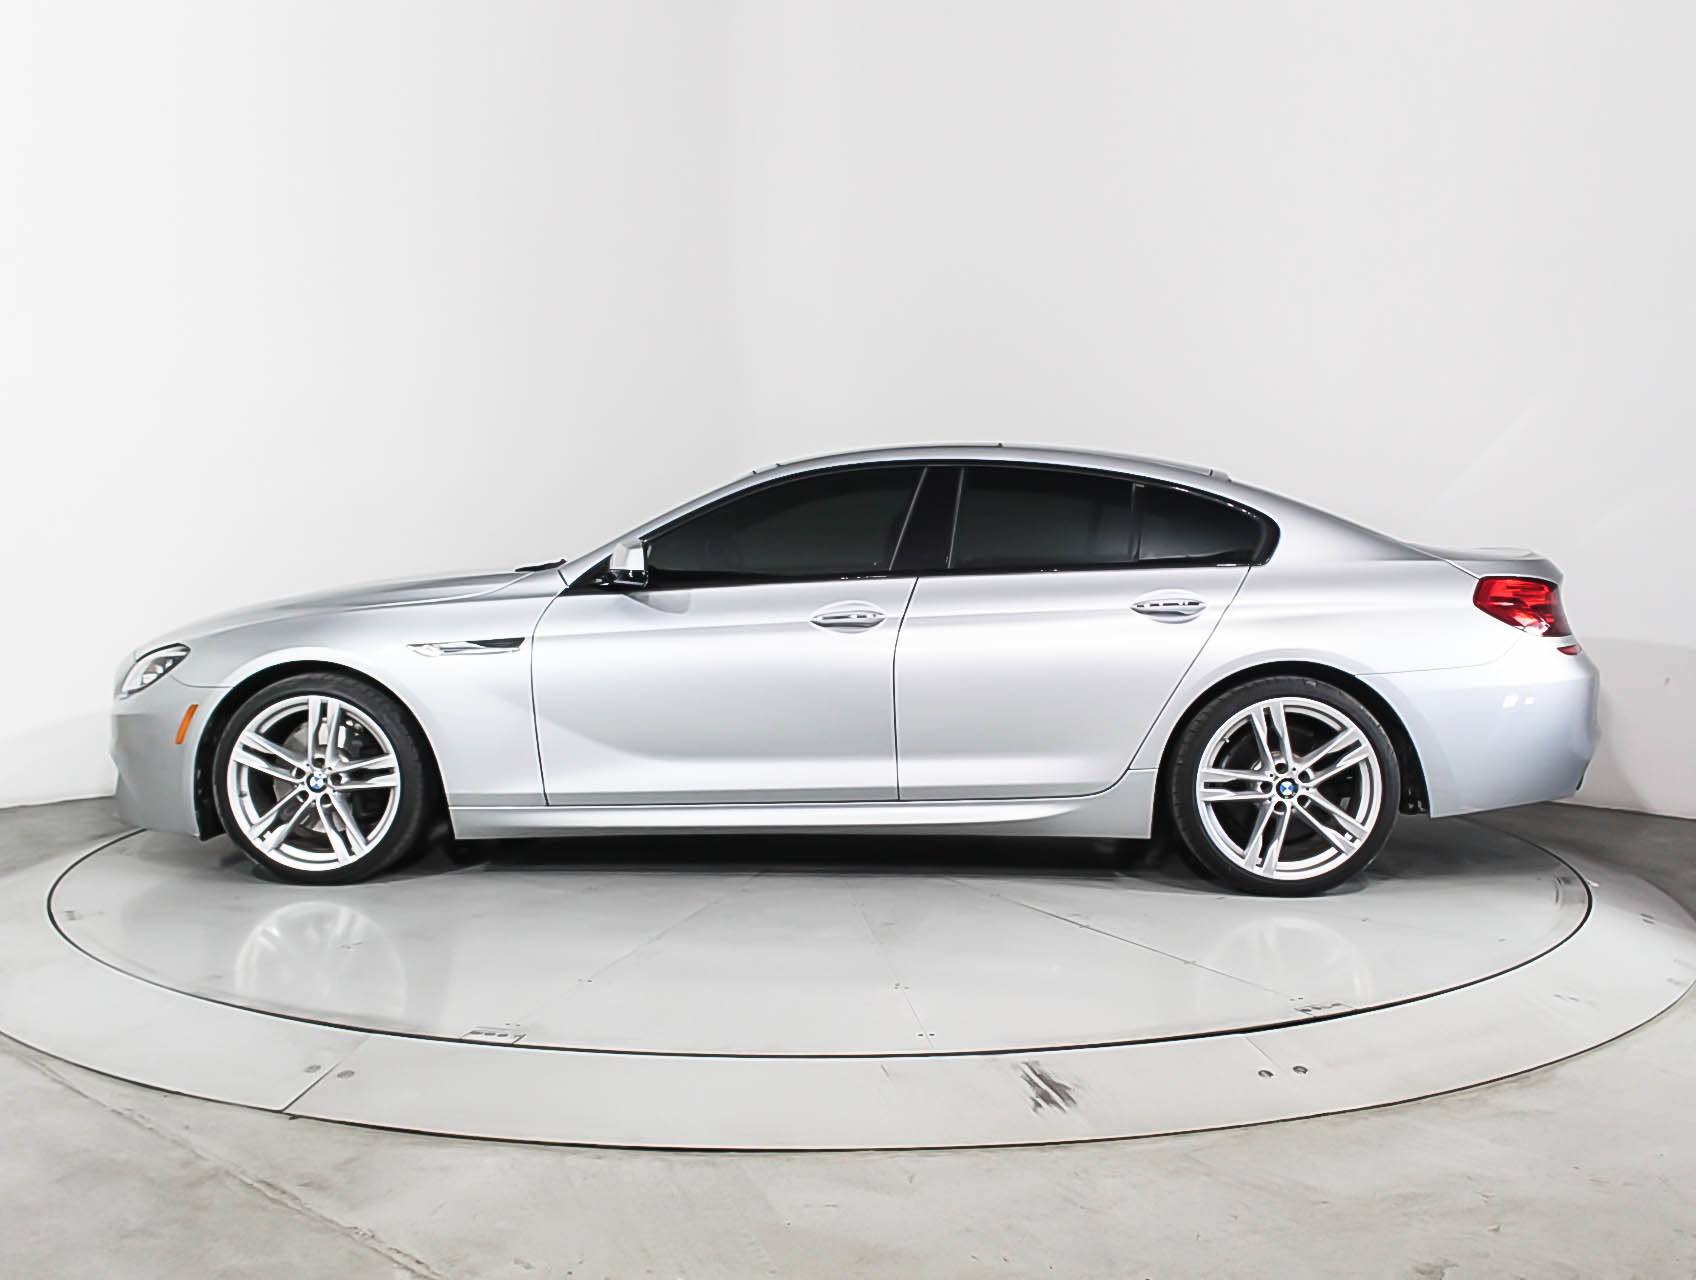 Used 2015 BMW 6 SERIES 640i Gran Coupe M for sale in MARGATE | 97932